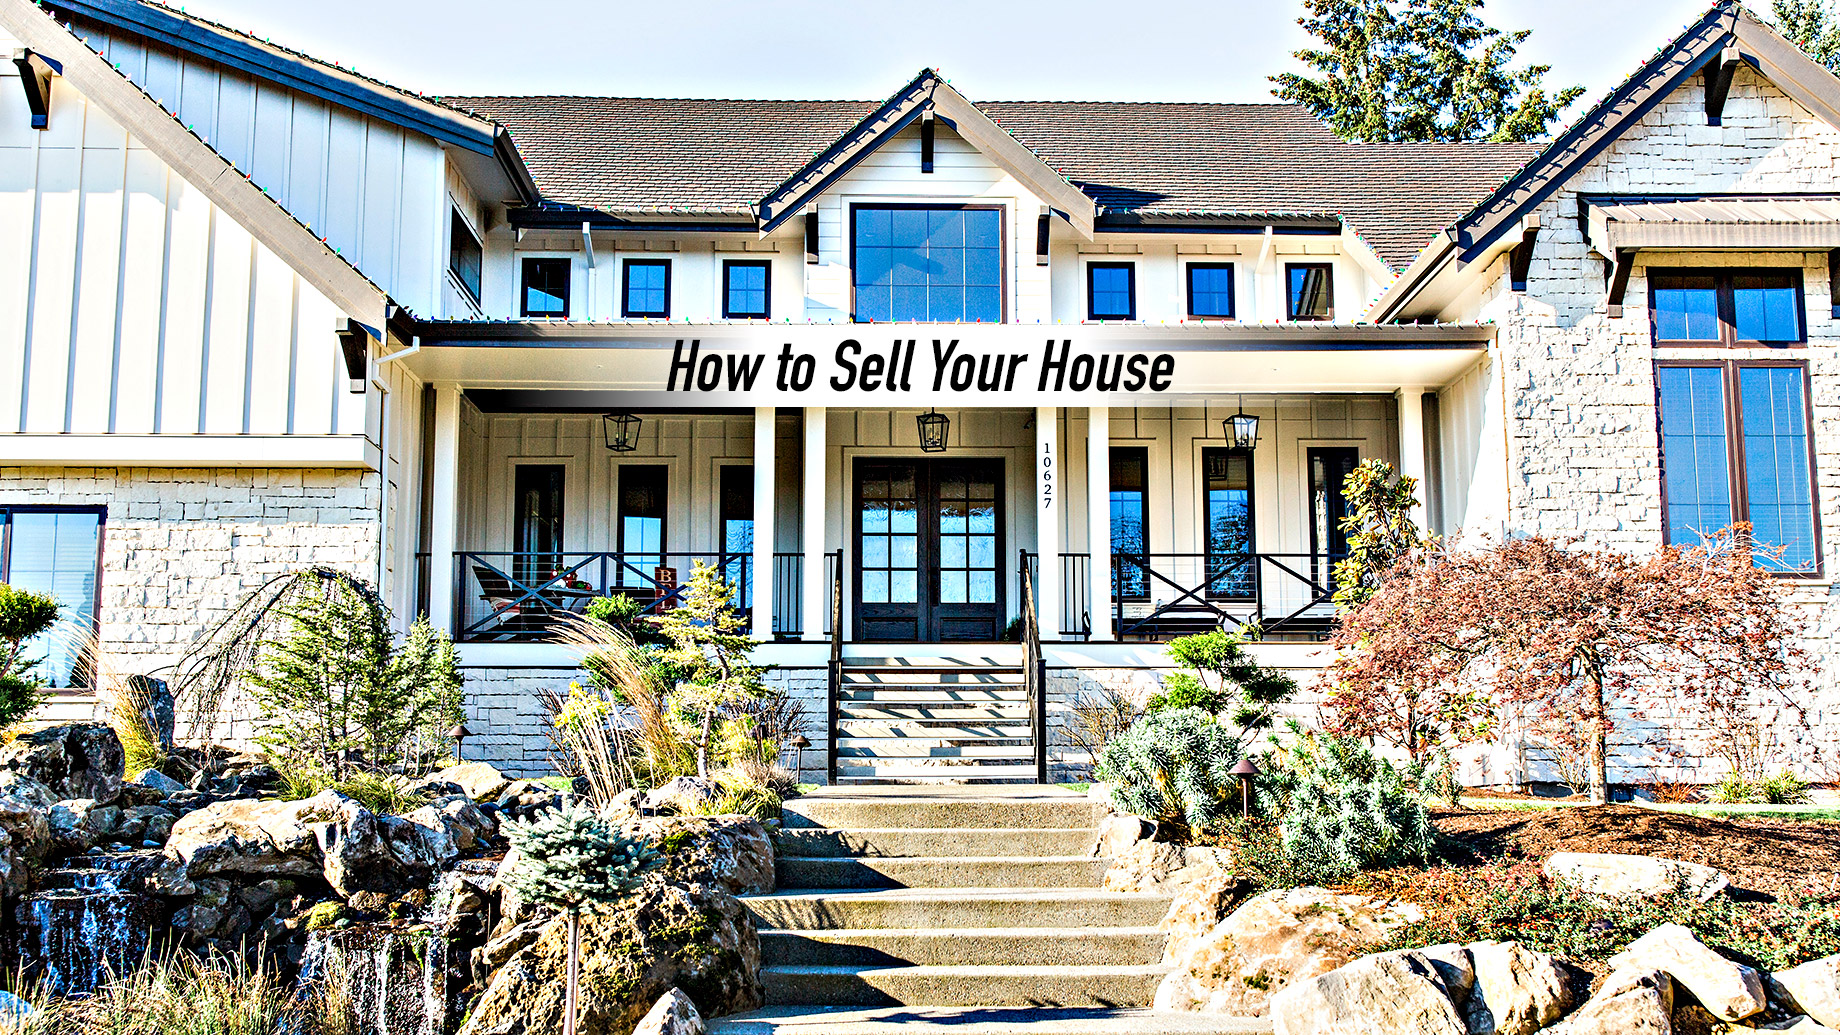 How to Sell Your House - A Complete Step-by-Step Guide